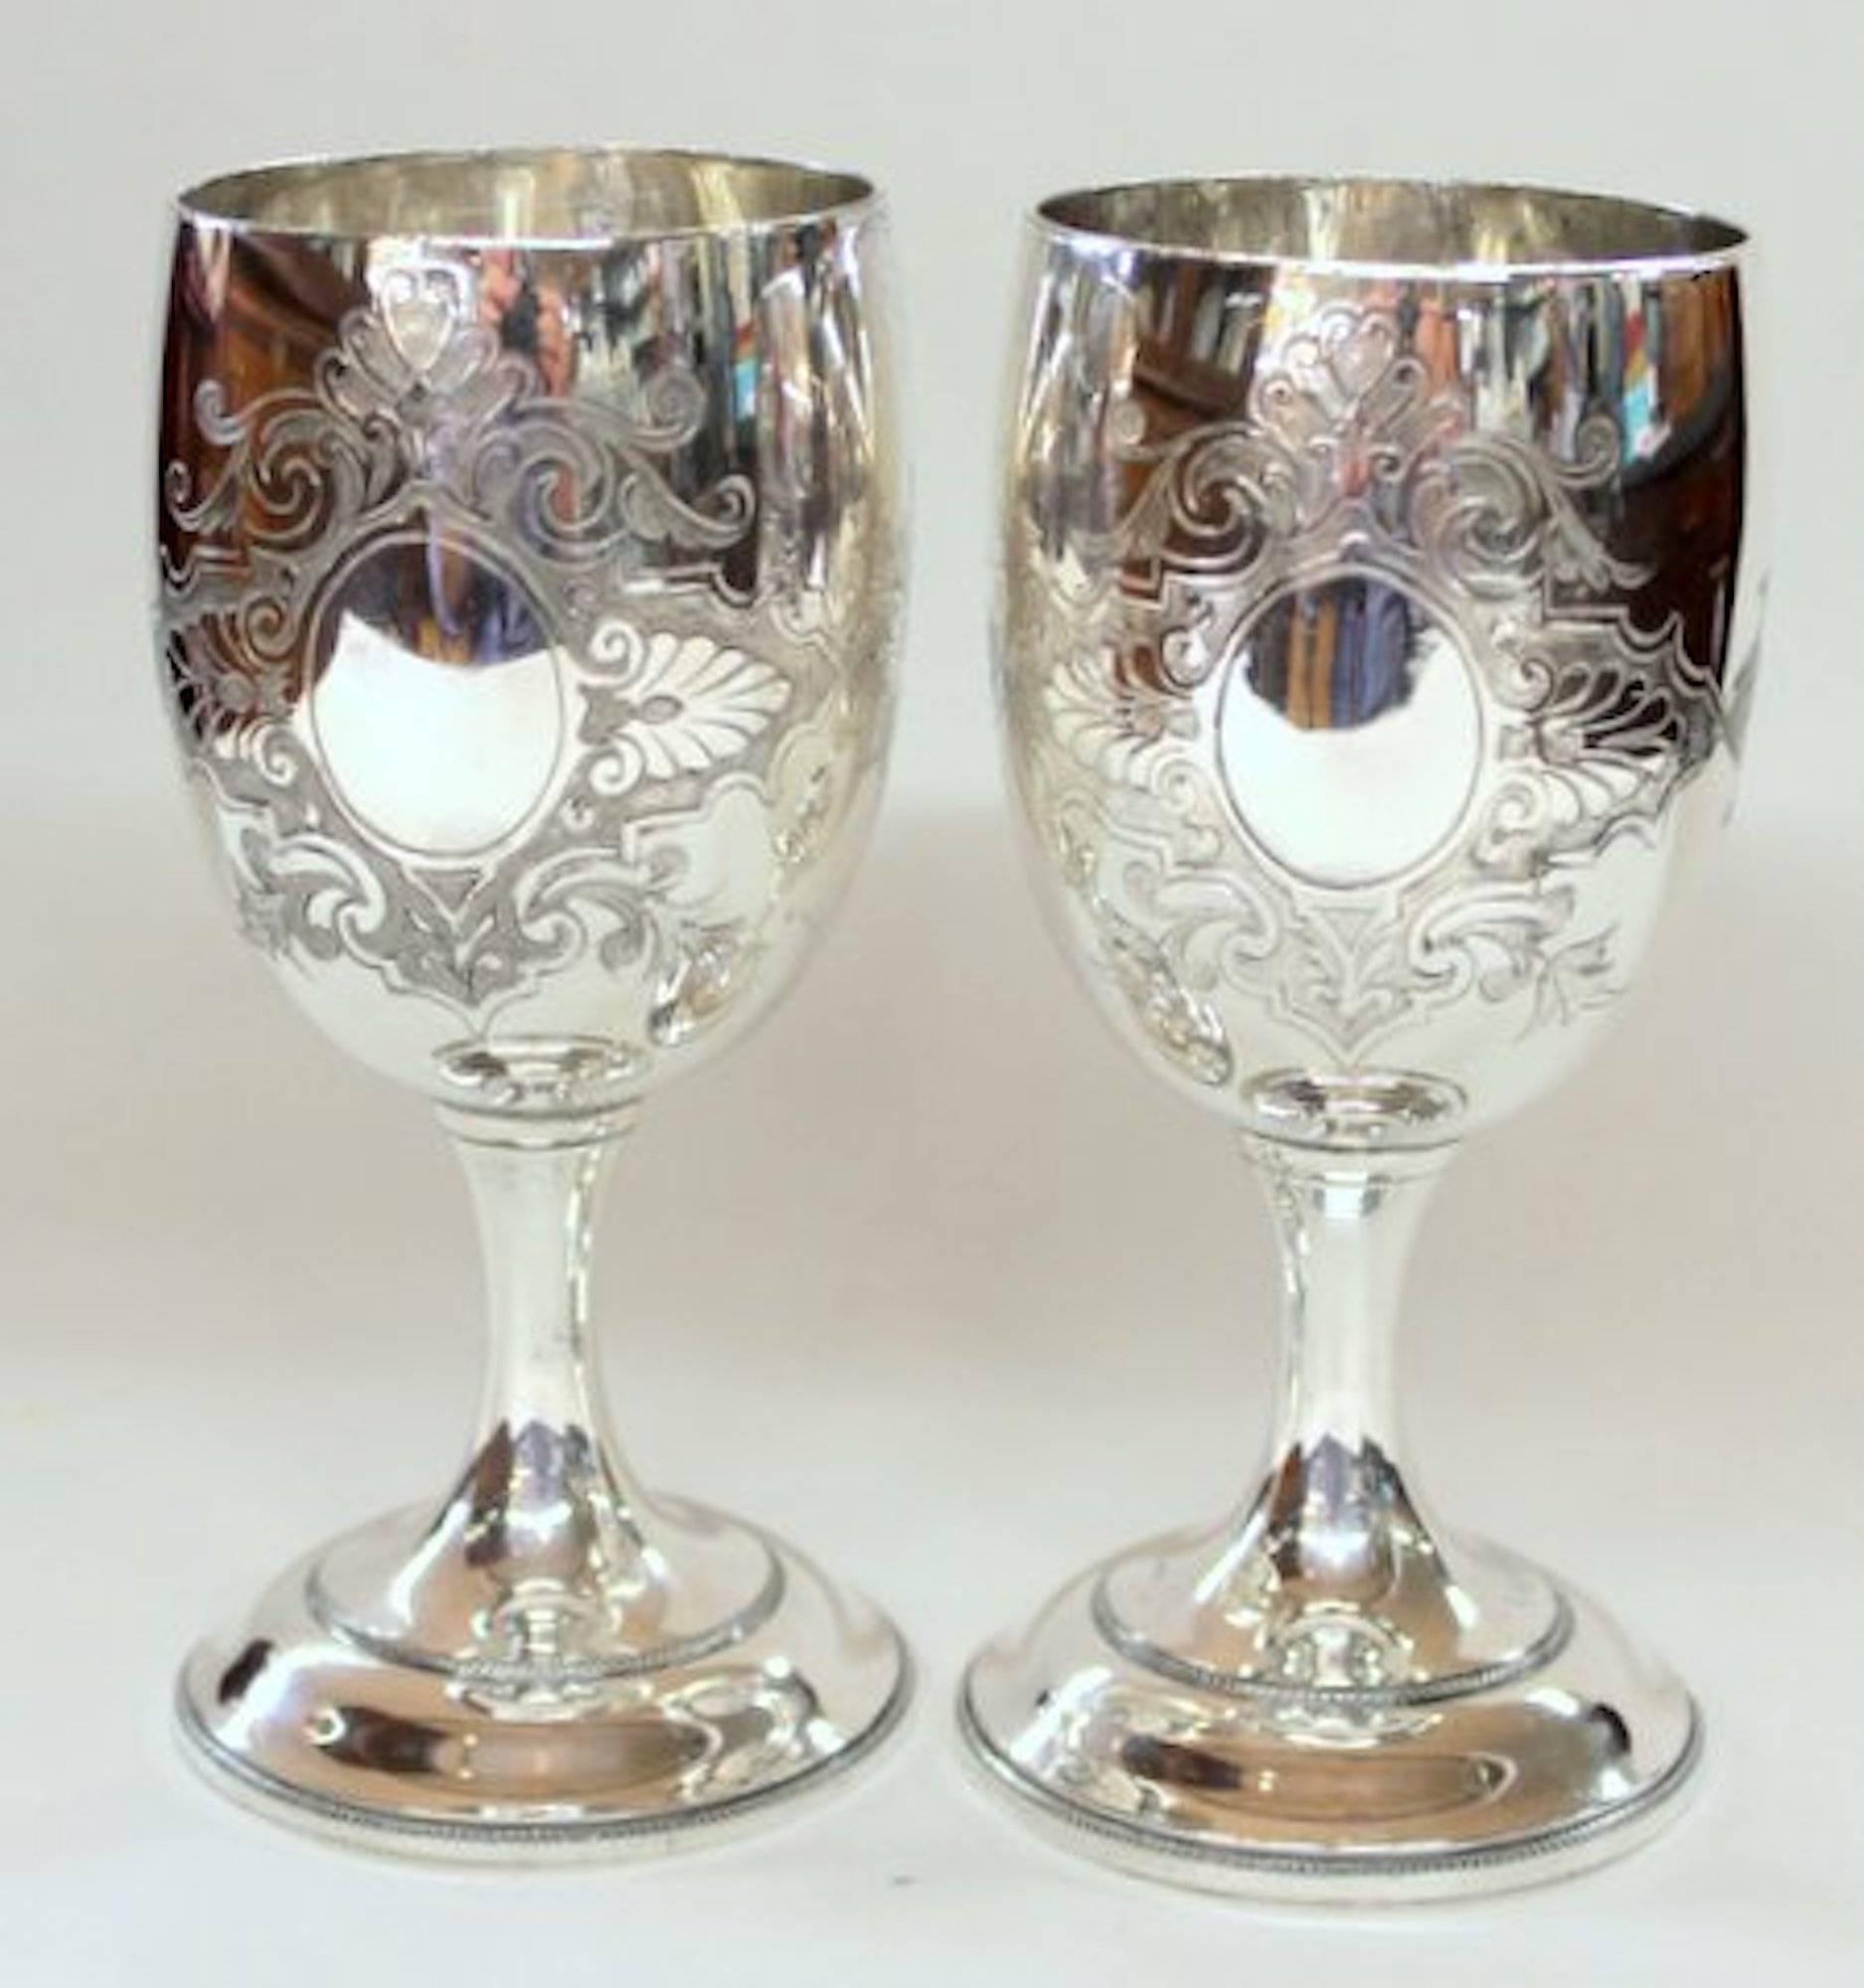 Rare pair of antique American silver plate hand chased and engraved goblets. Please note the fabulous hand engraved motif of the church to the obverse and a plain open cartouche suitable for inscribing on the reverse. Also, fabulous hand engraved